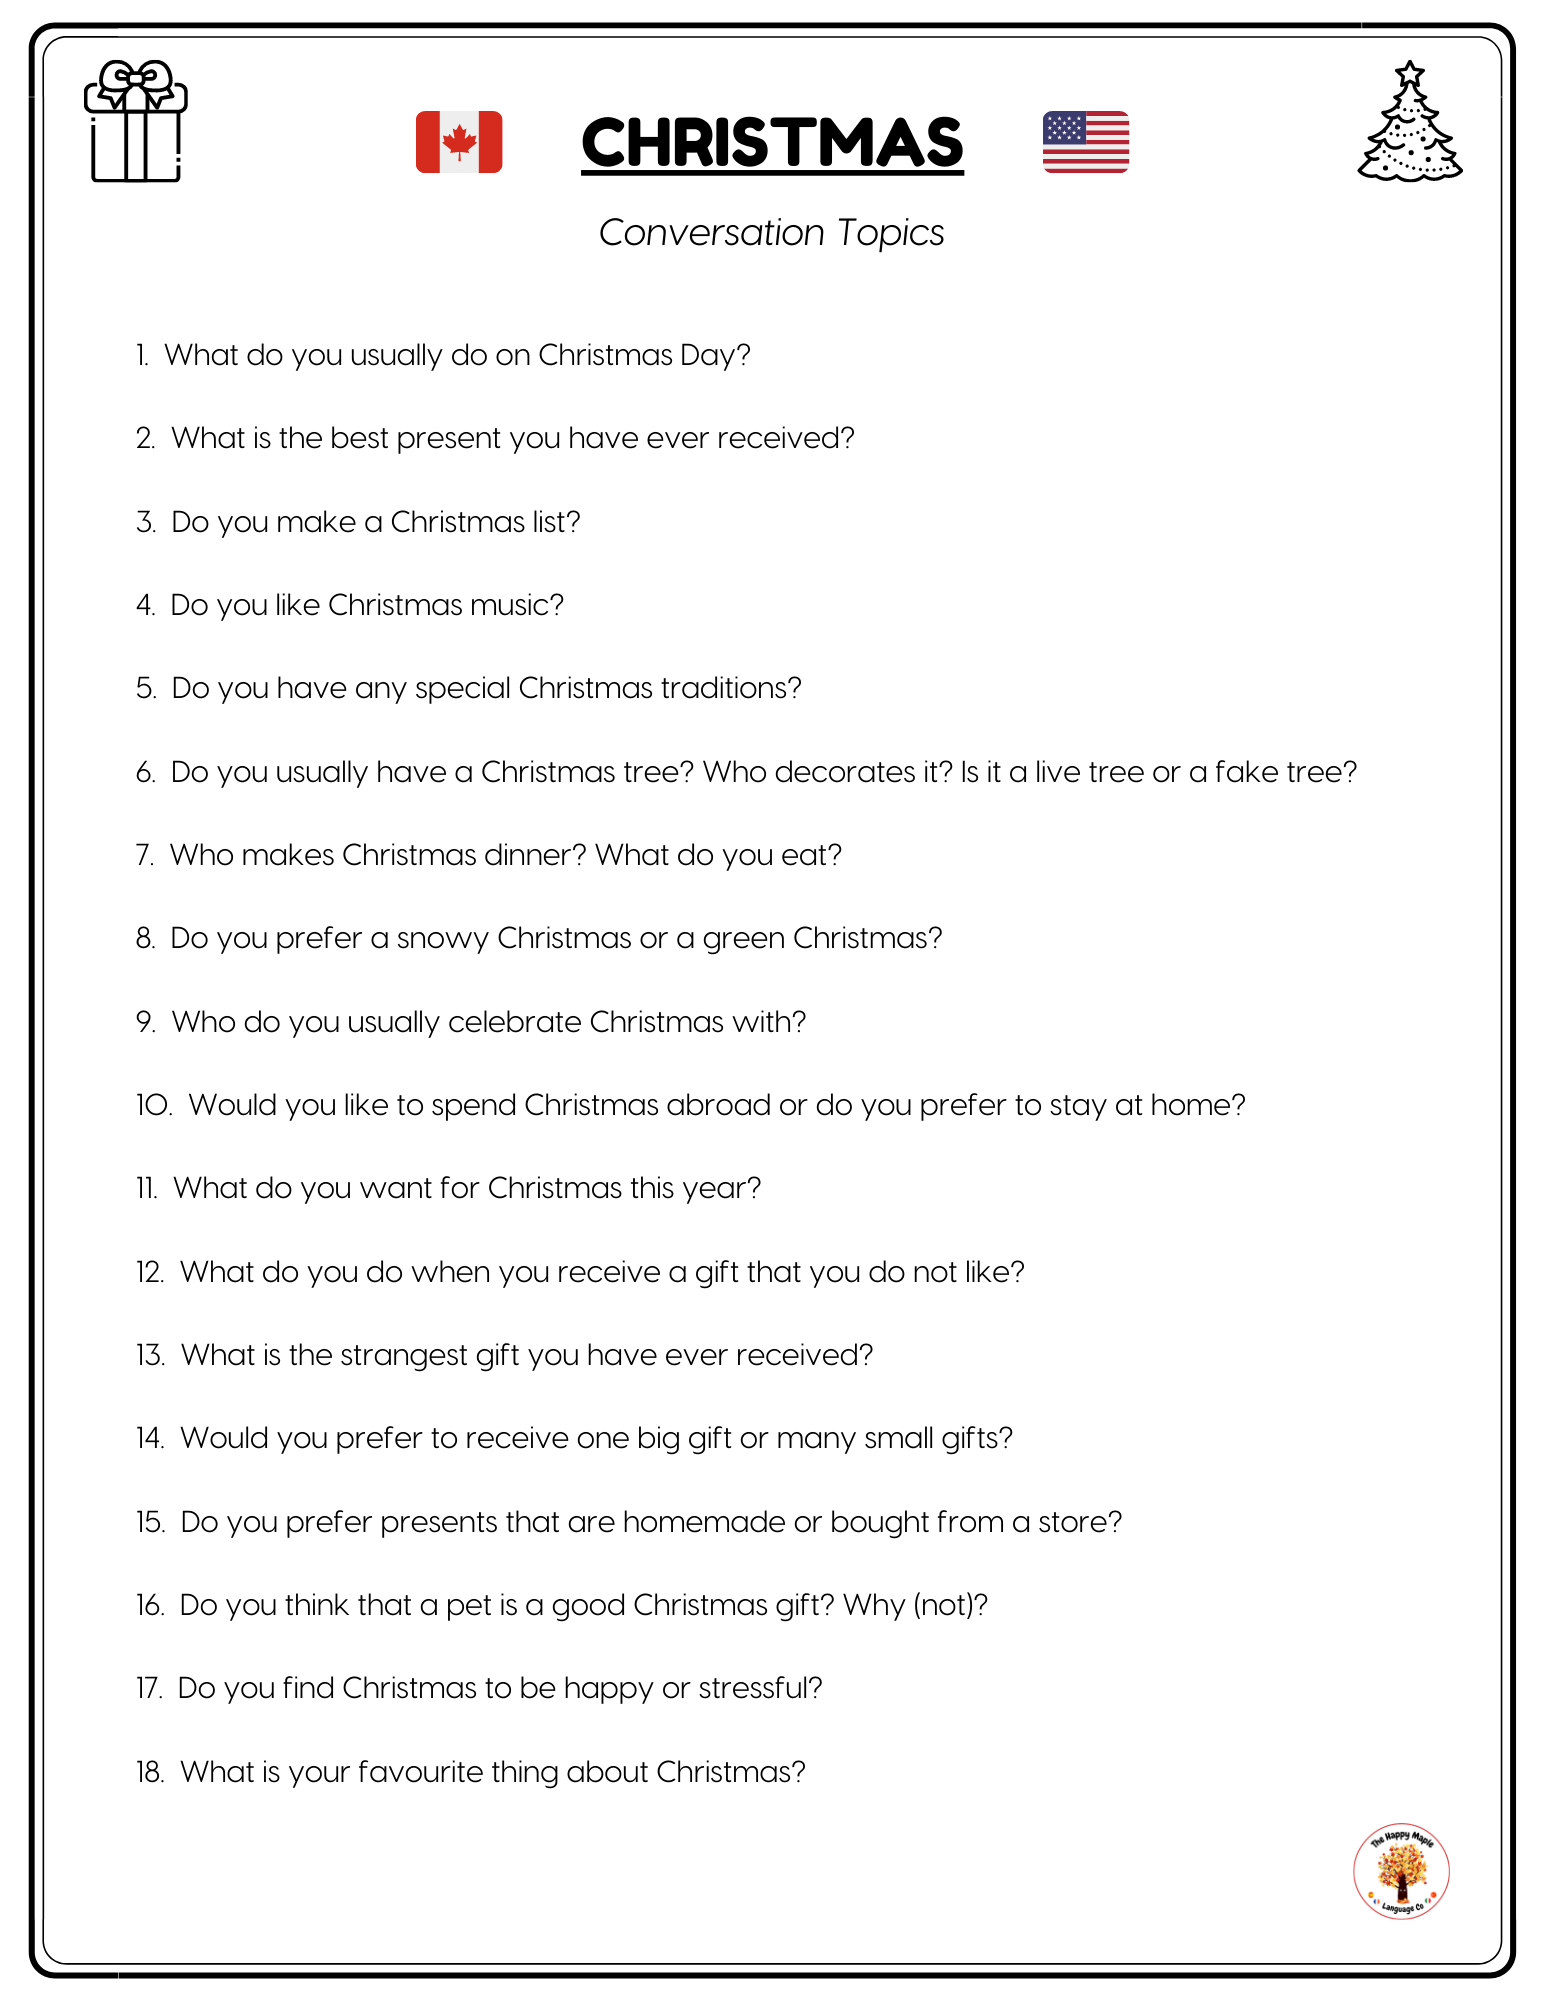 English ESL EFL Conversation Questions about Christmas Free Download